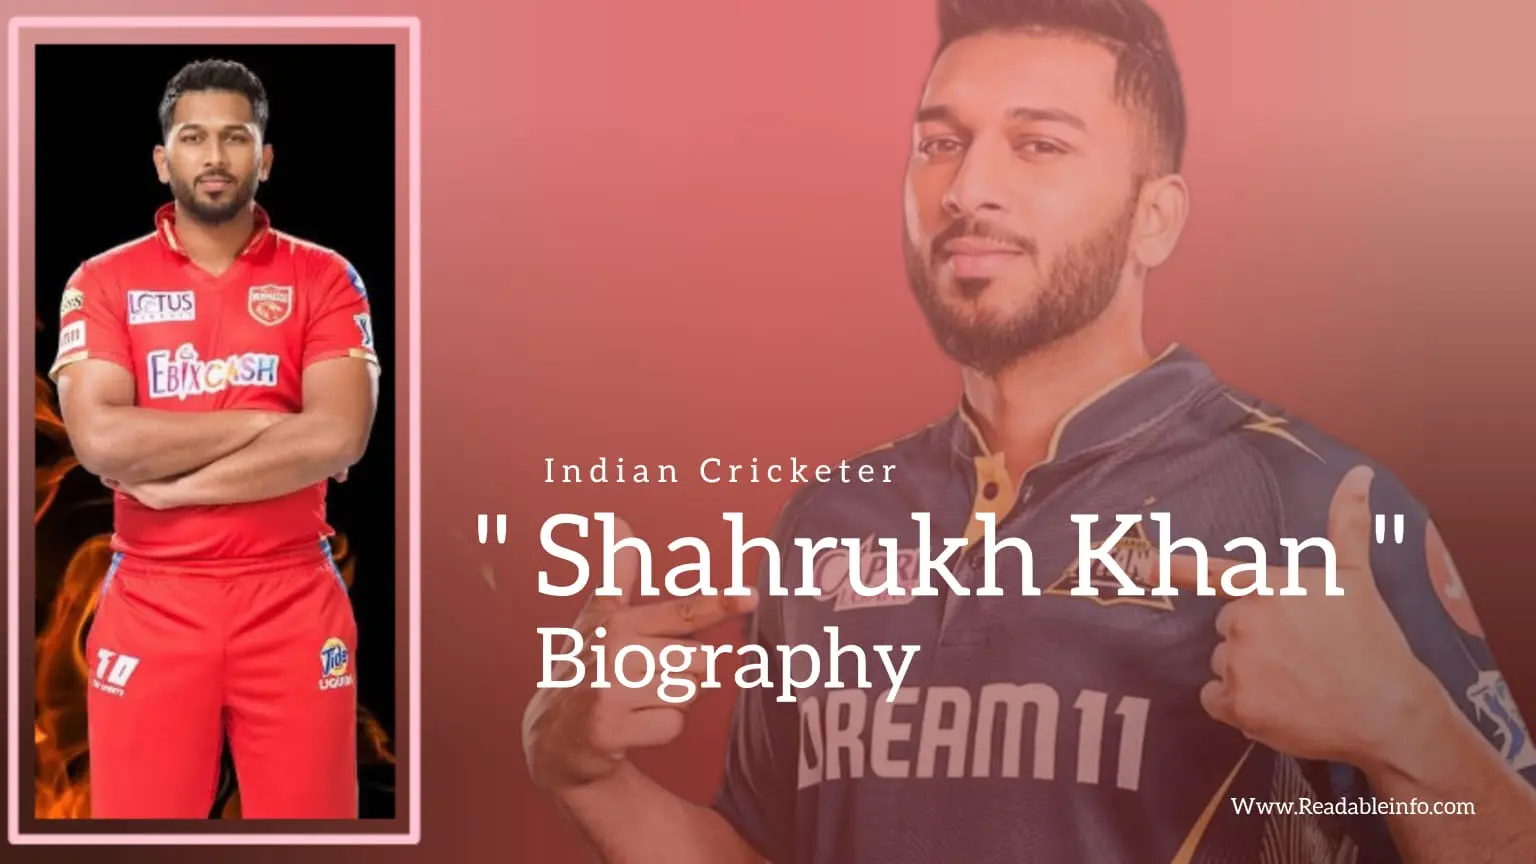 You are currently viewing Shahrukh Khan Biography (Indian Cricketer)